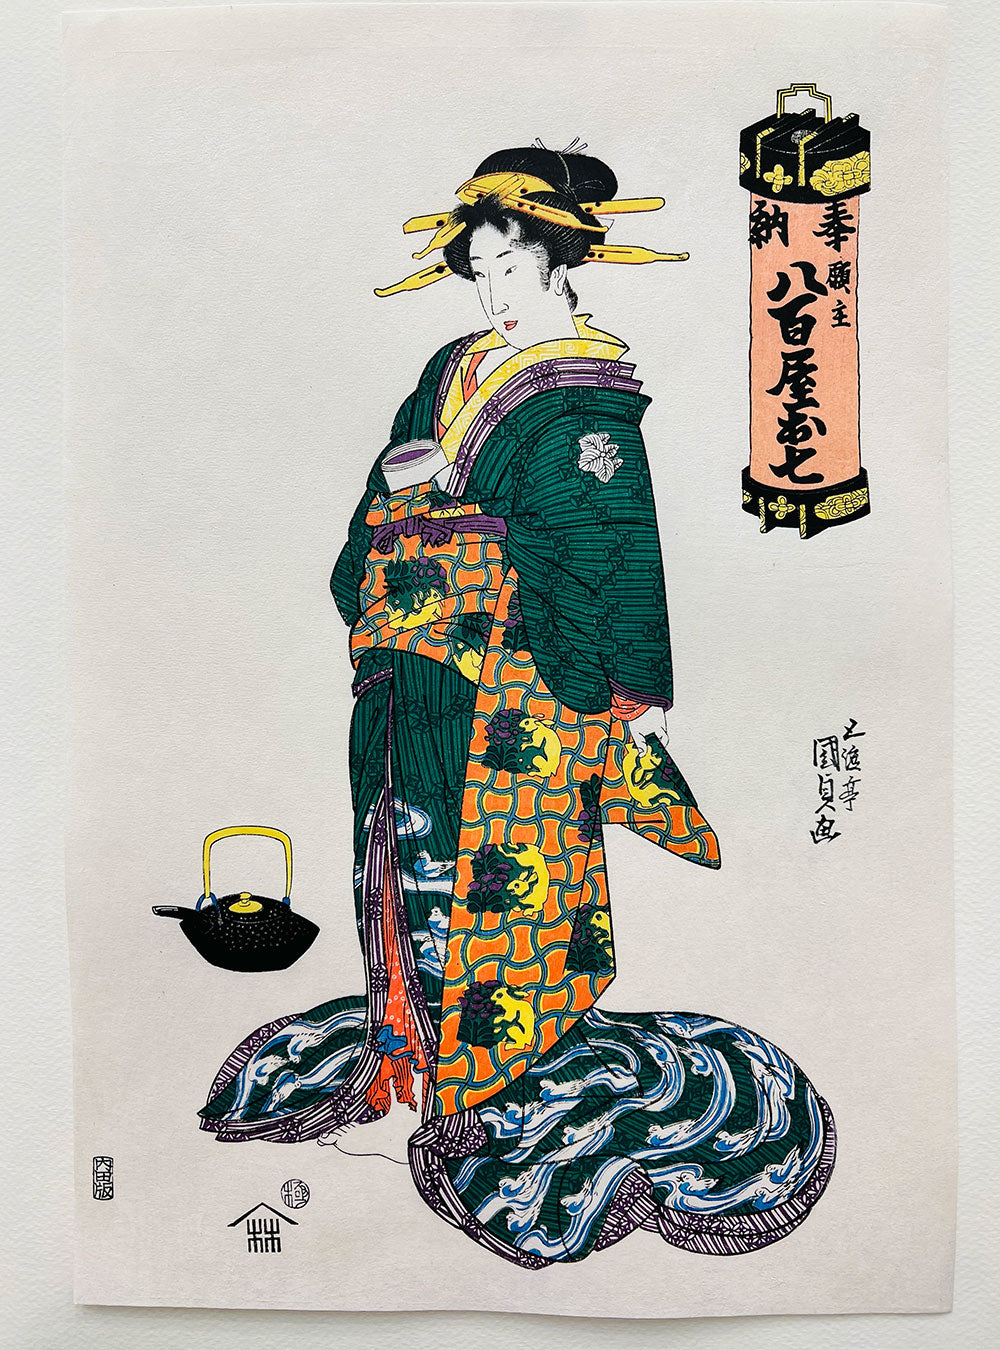 Woodblock print "Ohichi from Greengrocer" by KUNISADA published by Uchida art